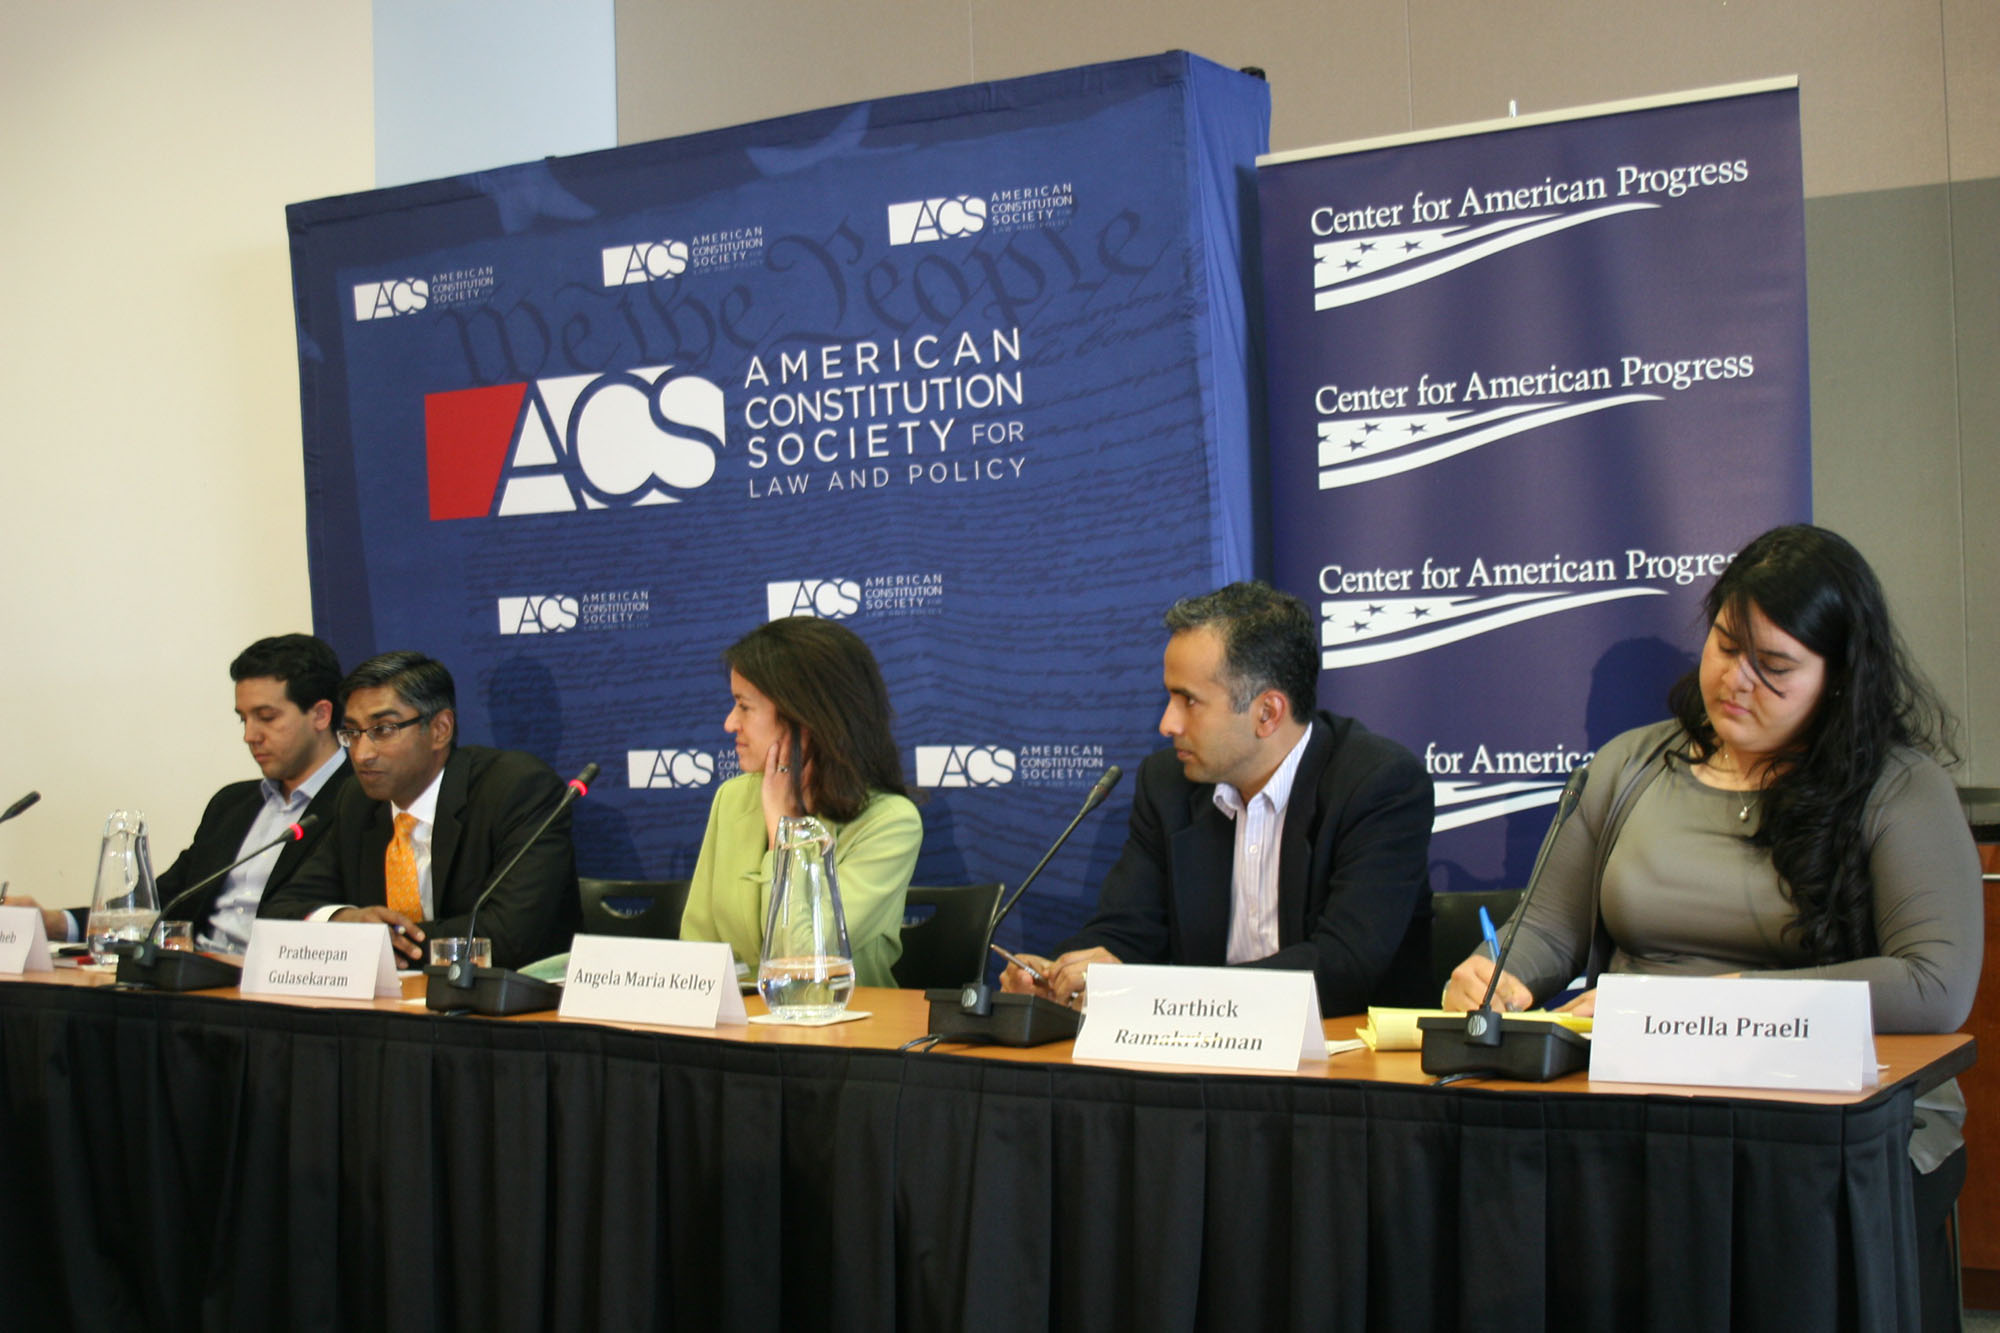 Groups hope to chart alternative immigration reform course for states ...